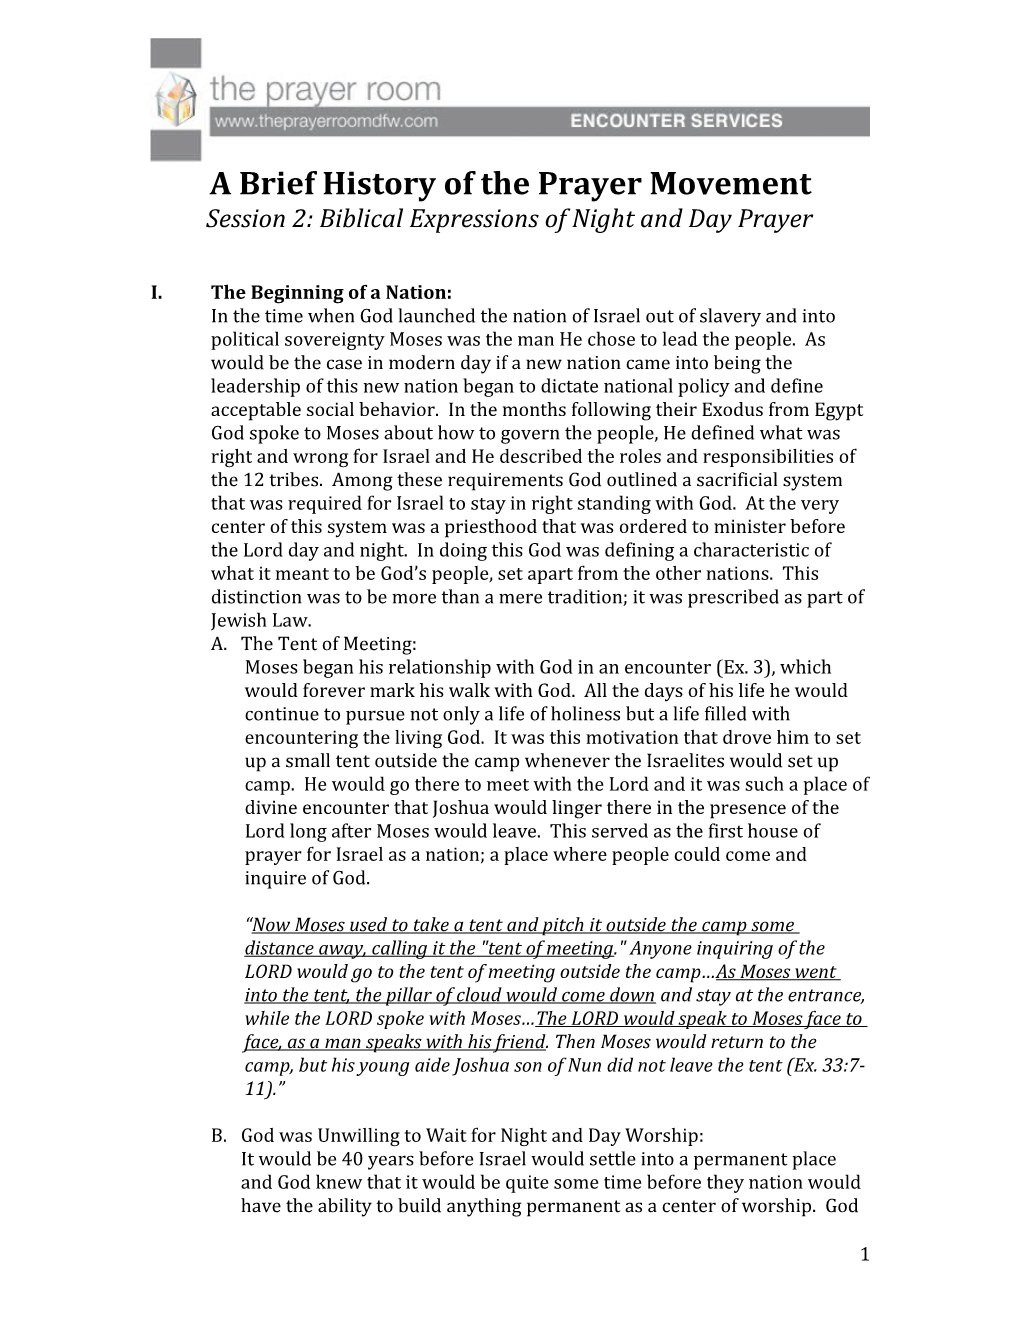 A Brief History of the Prayer Movement